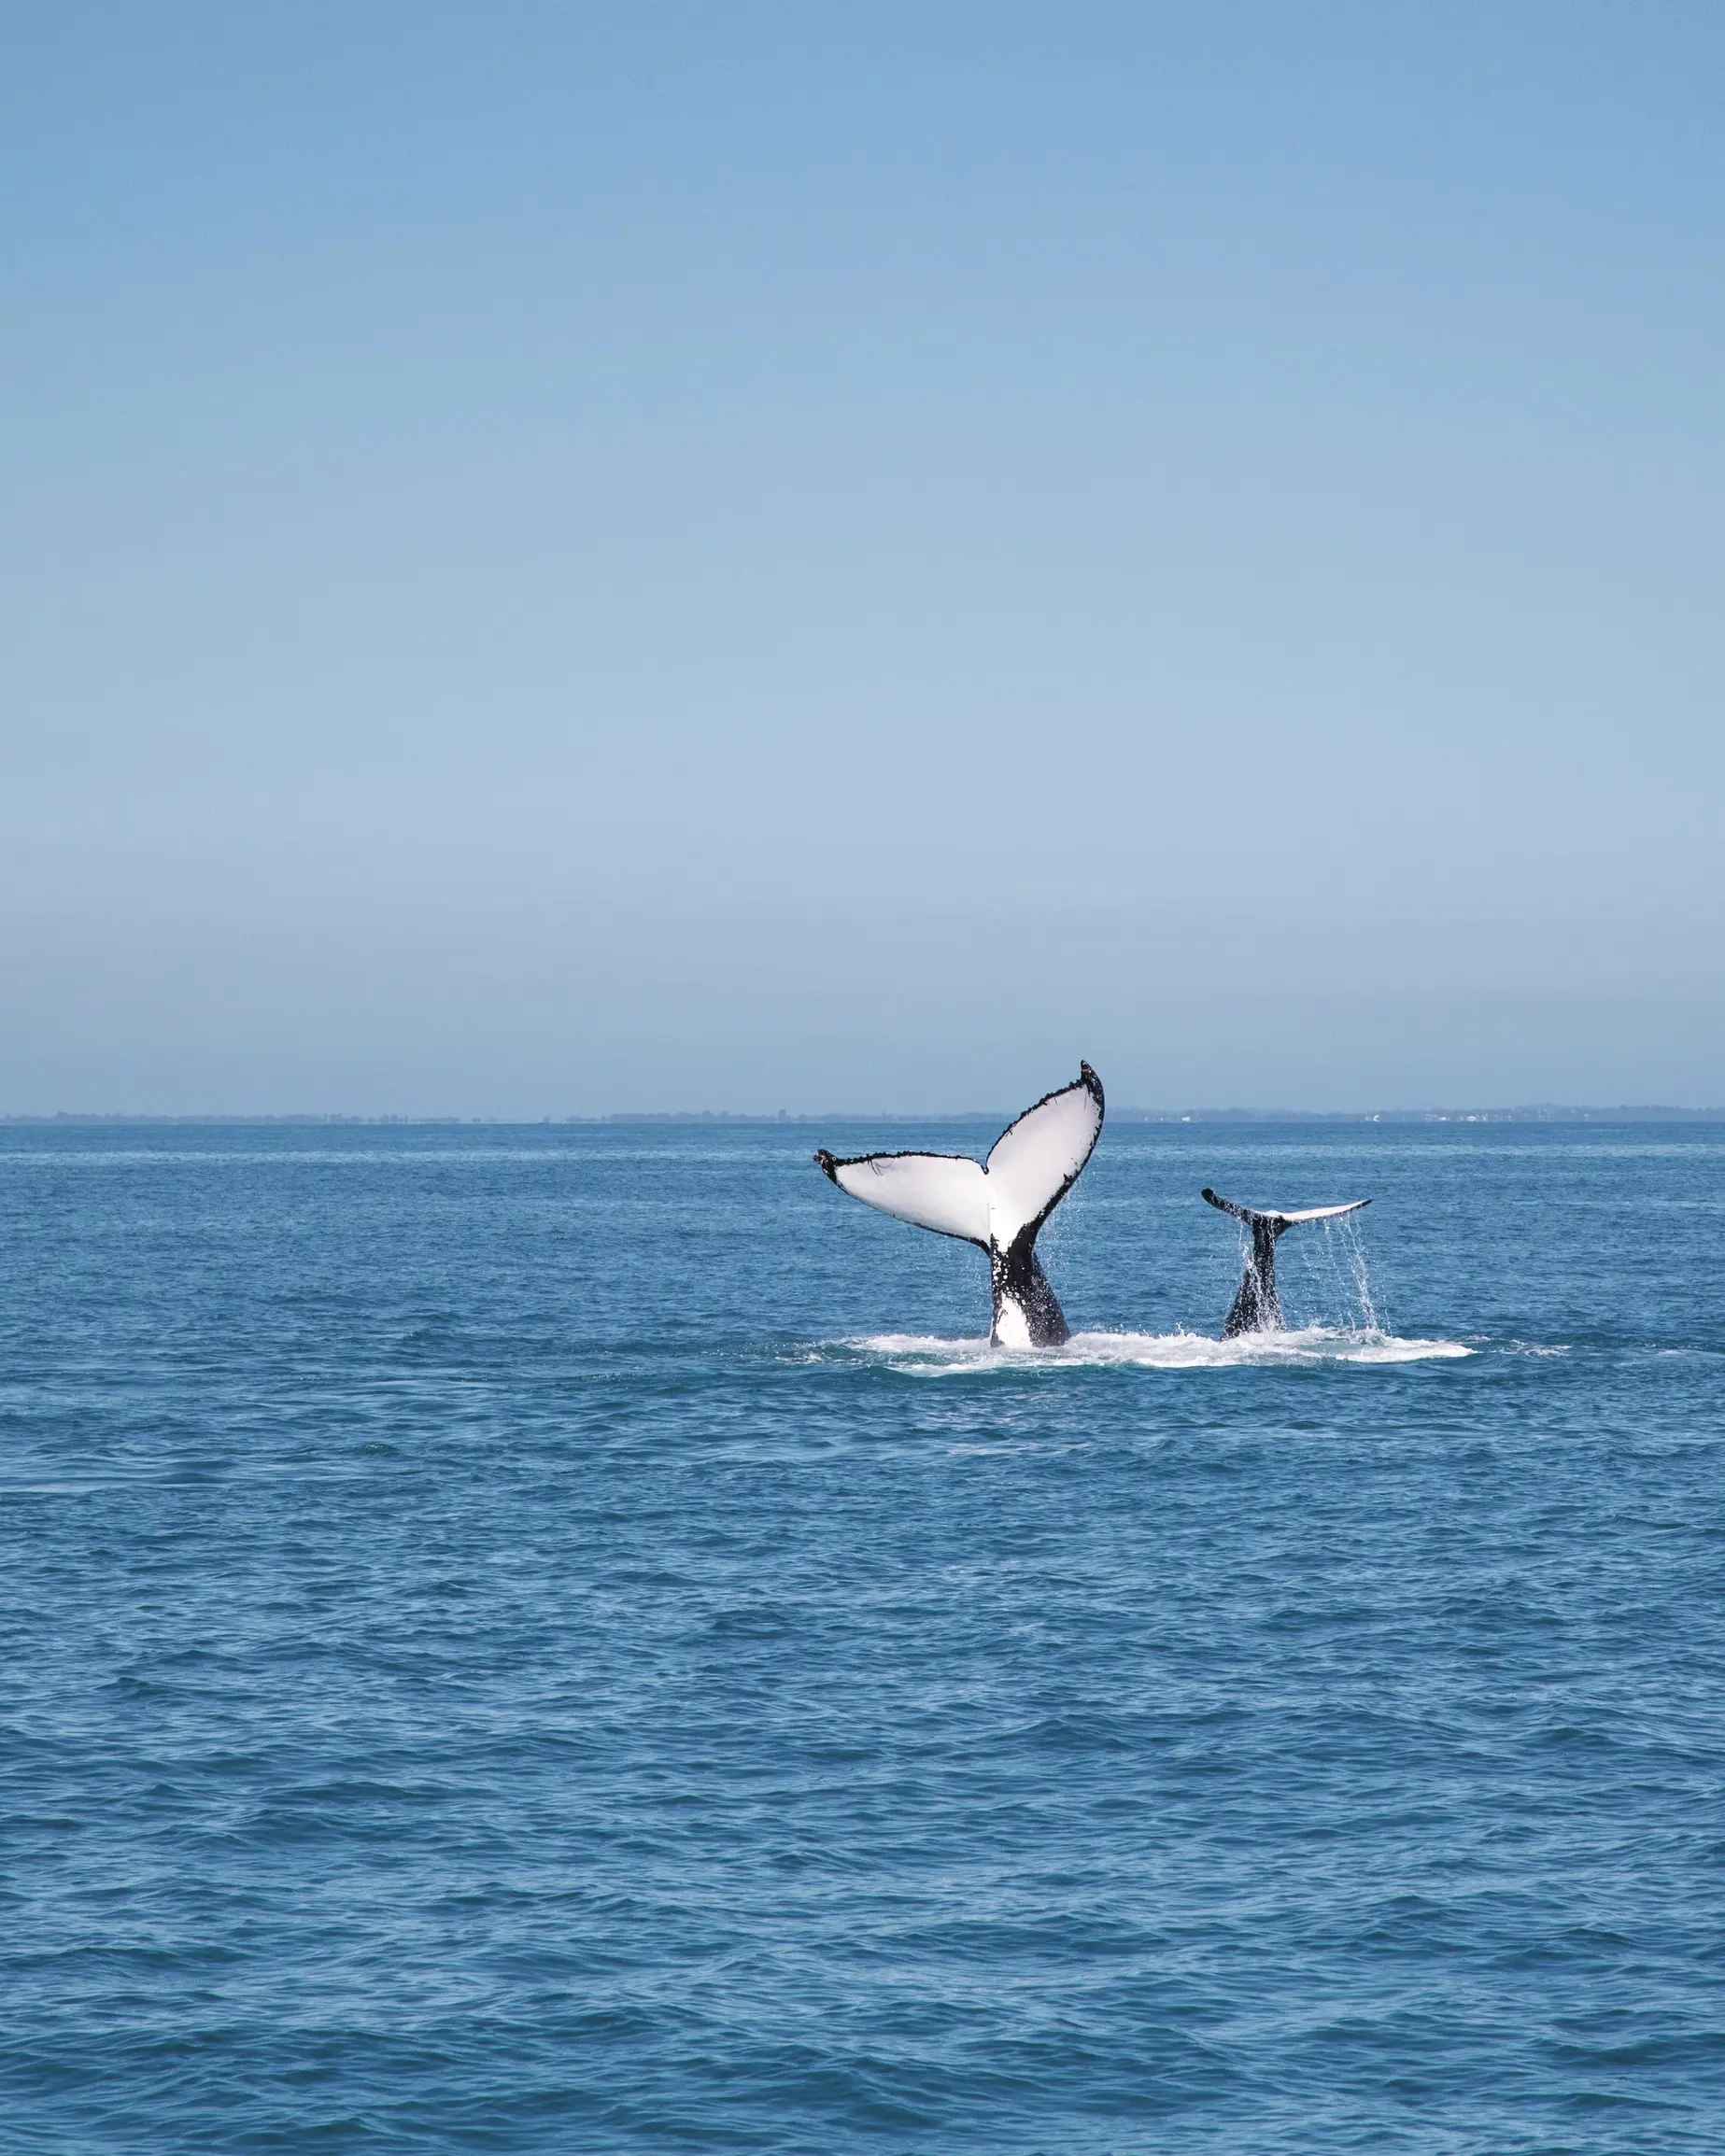 Two humpback whales' tails splashing in the water off the coast of Hervey Bay, Queensland. Image credit: Tourism and Events Queensland